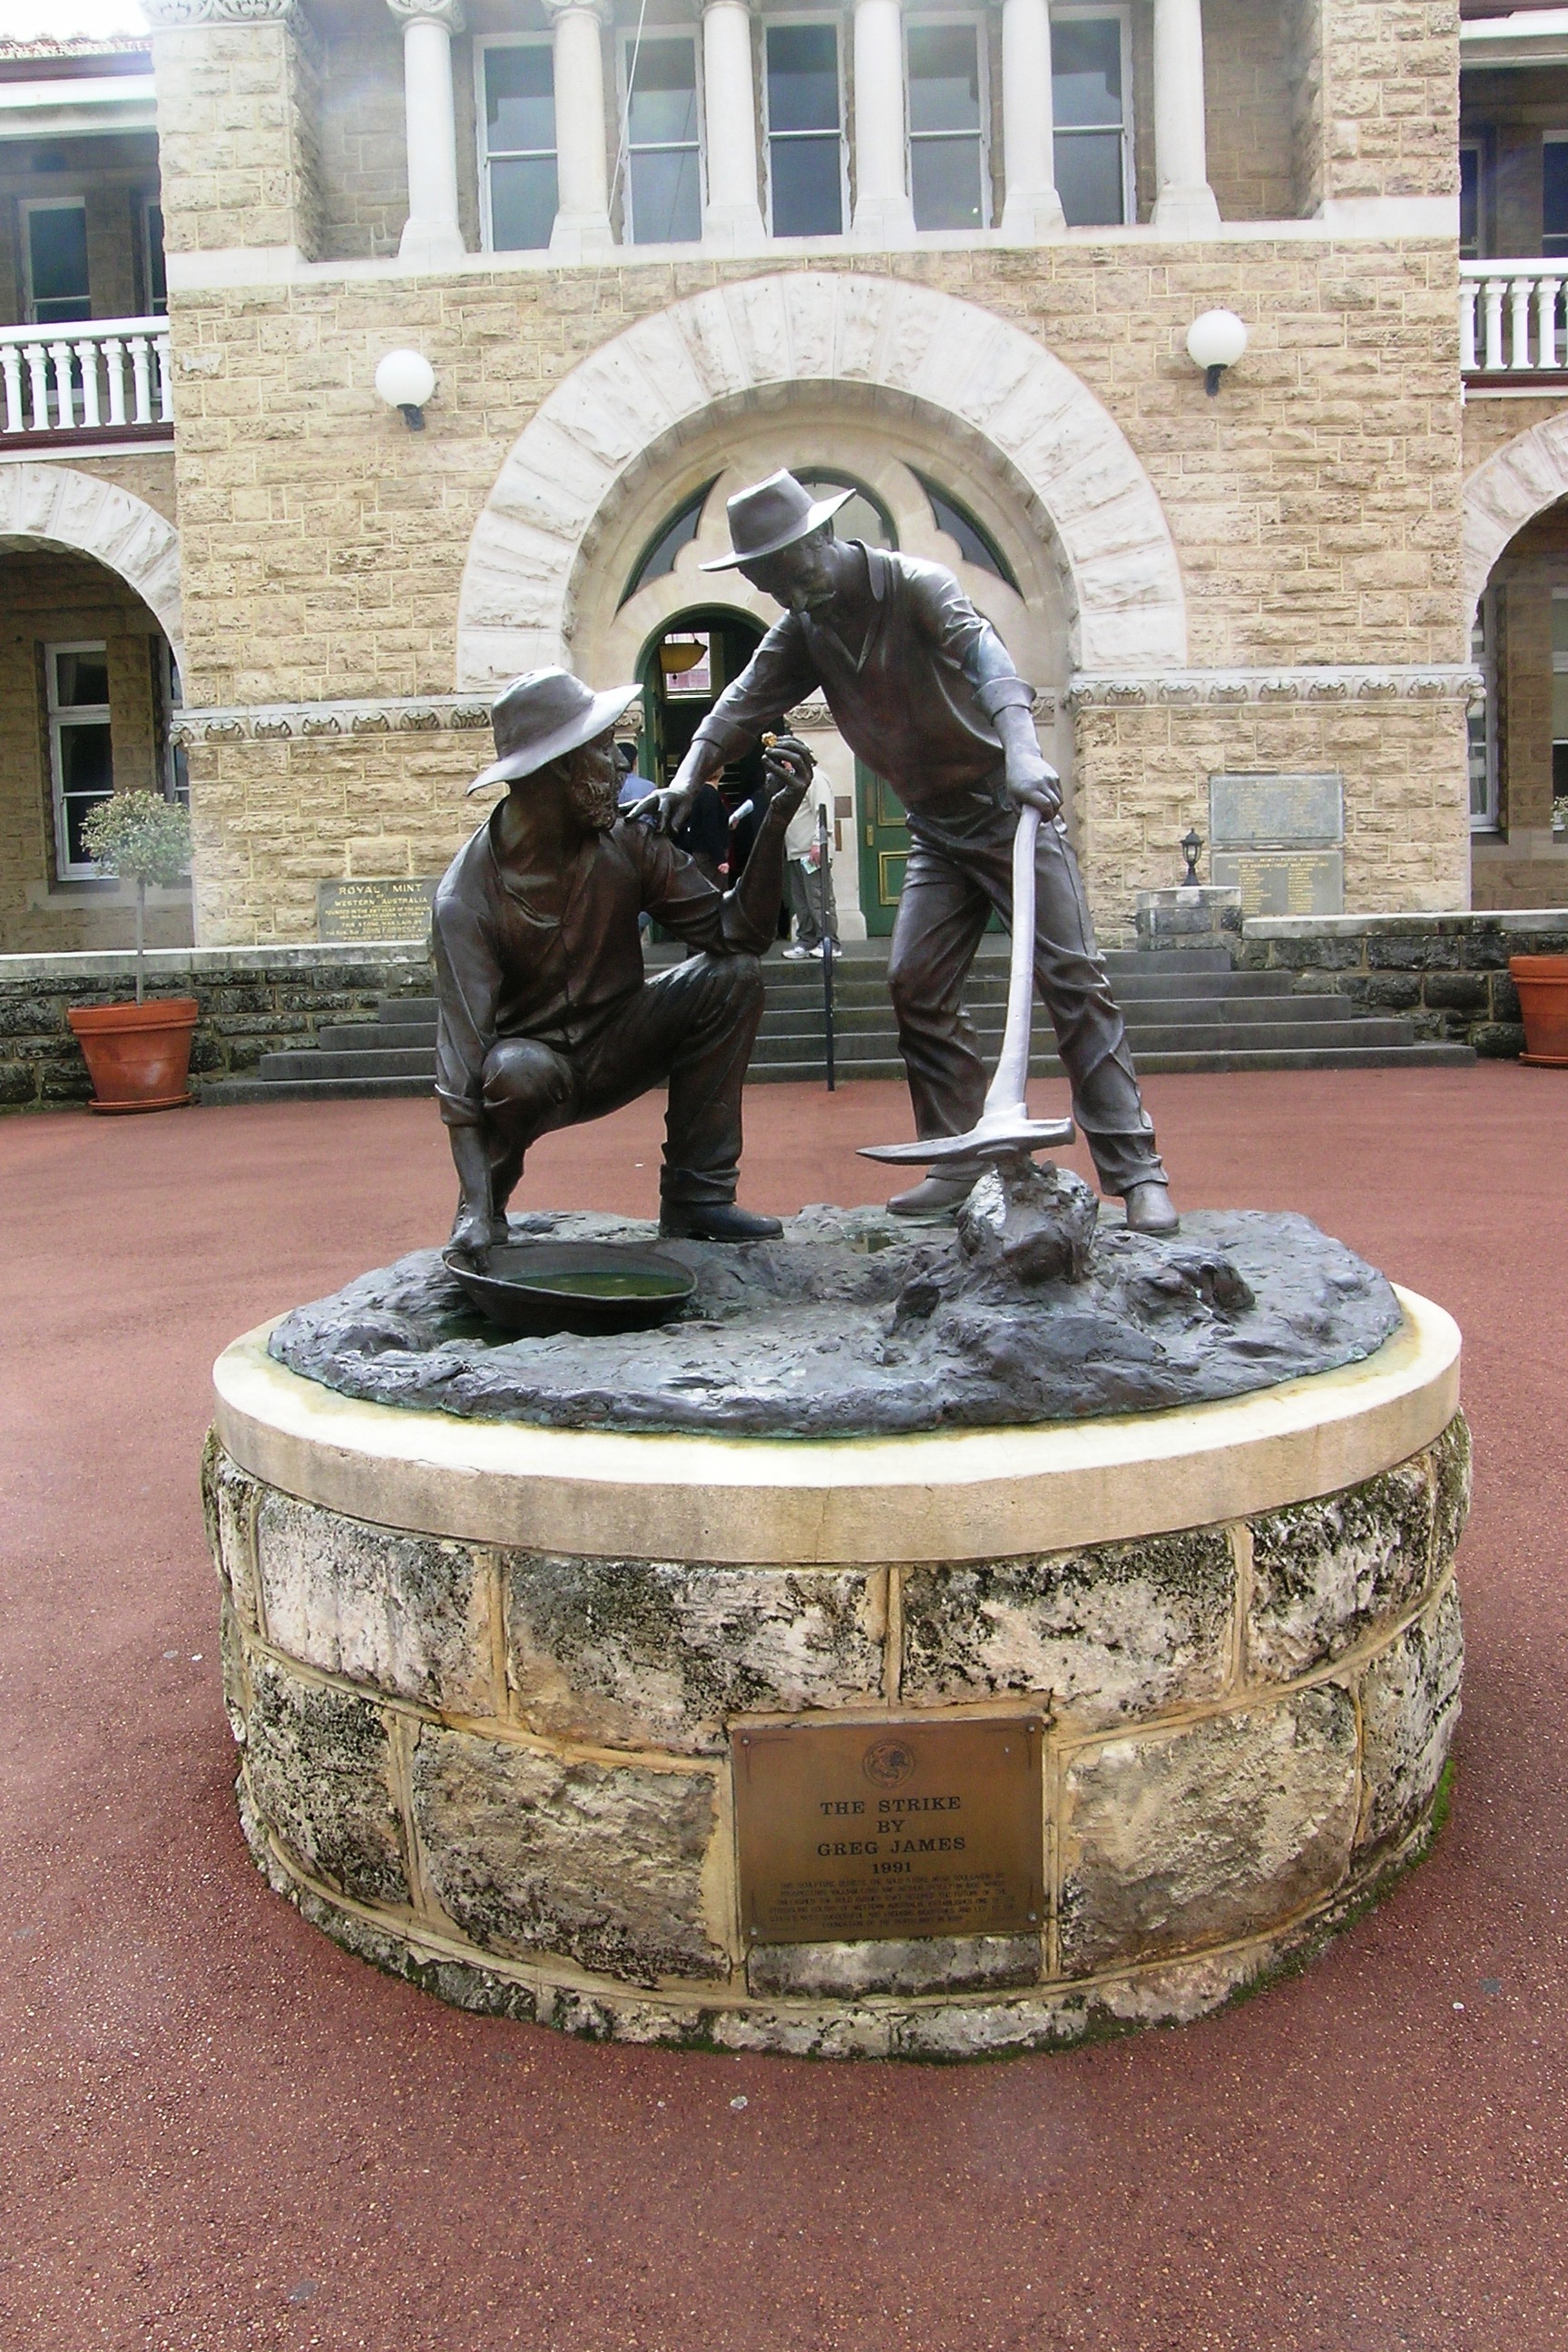 Perth Mint Prospector statue, named "The Strike" by Greg James, 1991